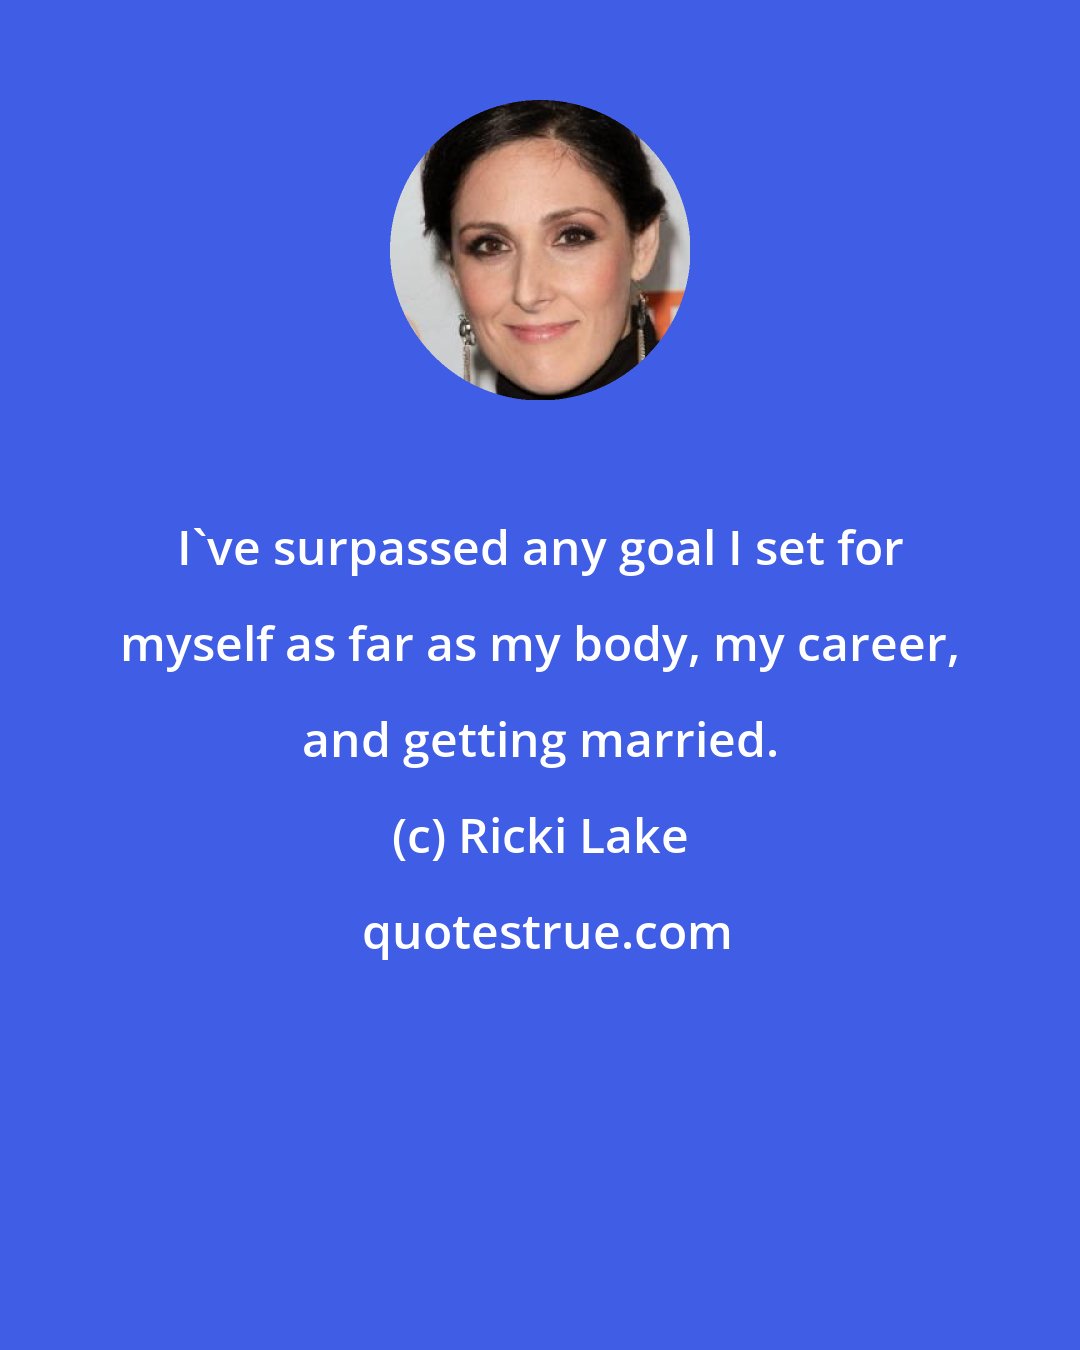 Ricki Lake: I've surpassed any goal I set for myself as far as my body, my career, and getting married.